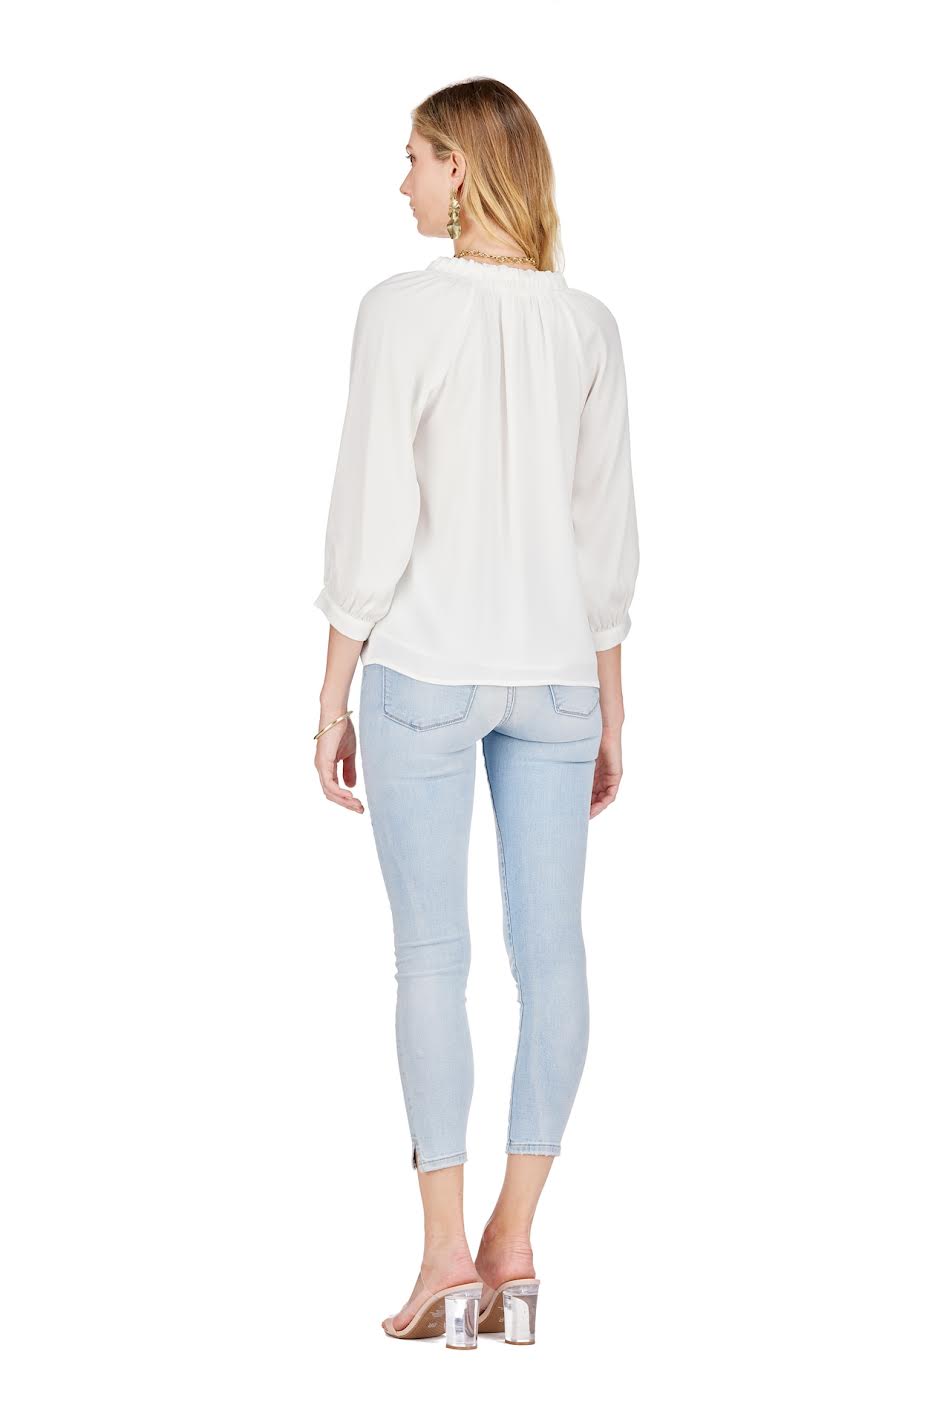 Jade ‘Ruched Neck Peaseant Top’